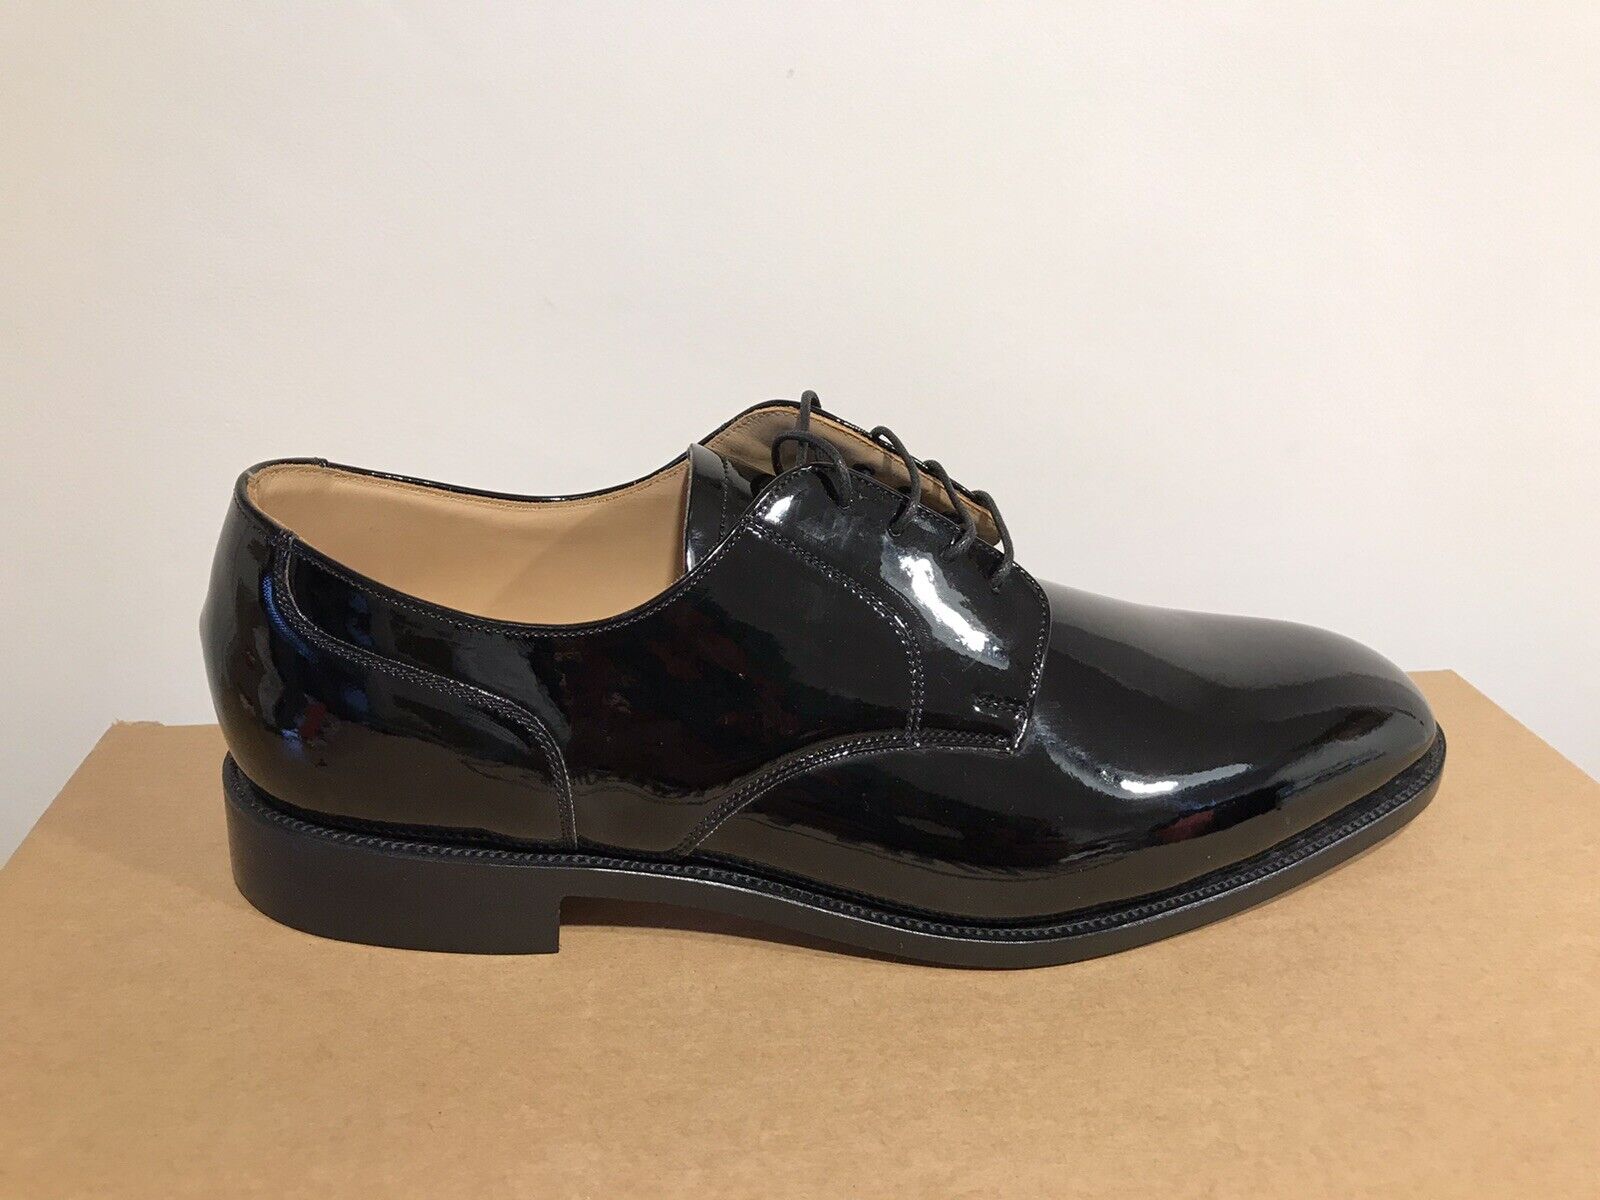 NPS SOLOVAIR Black Patent 4 Eye Loafer Gibson Shoes! SizeUK11! New!  Only£139.90